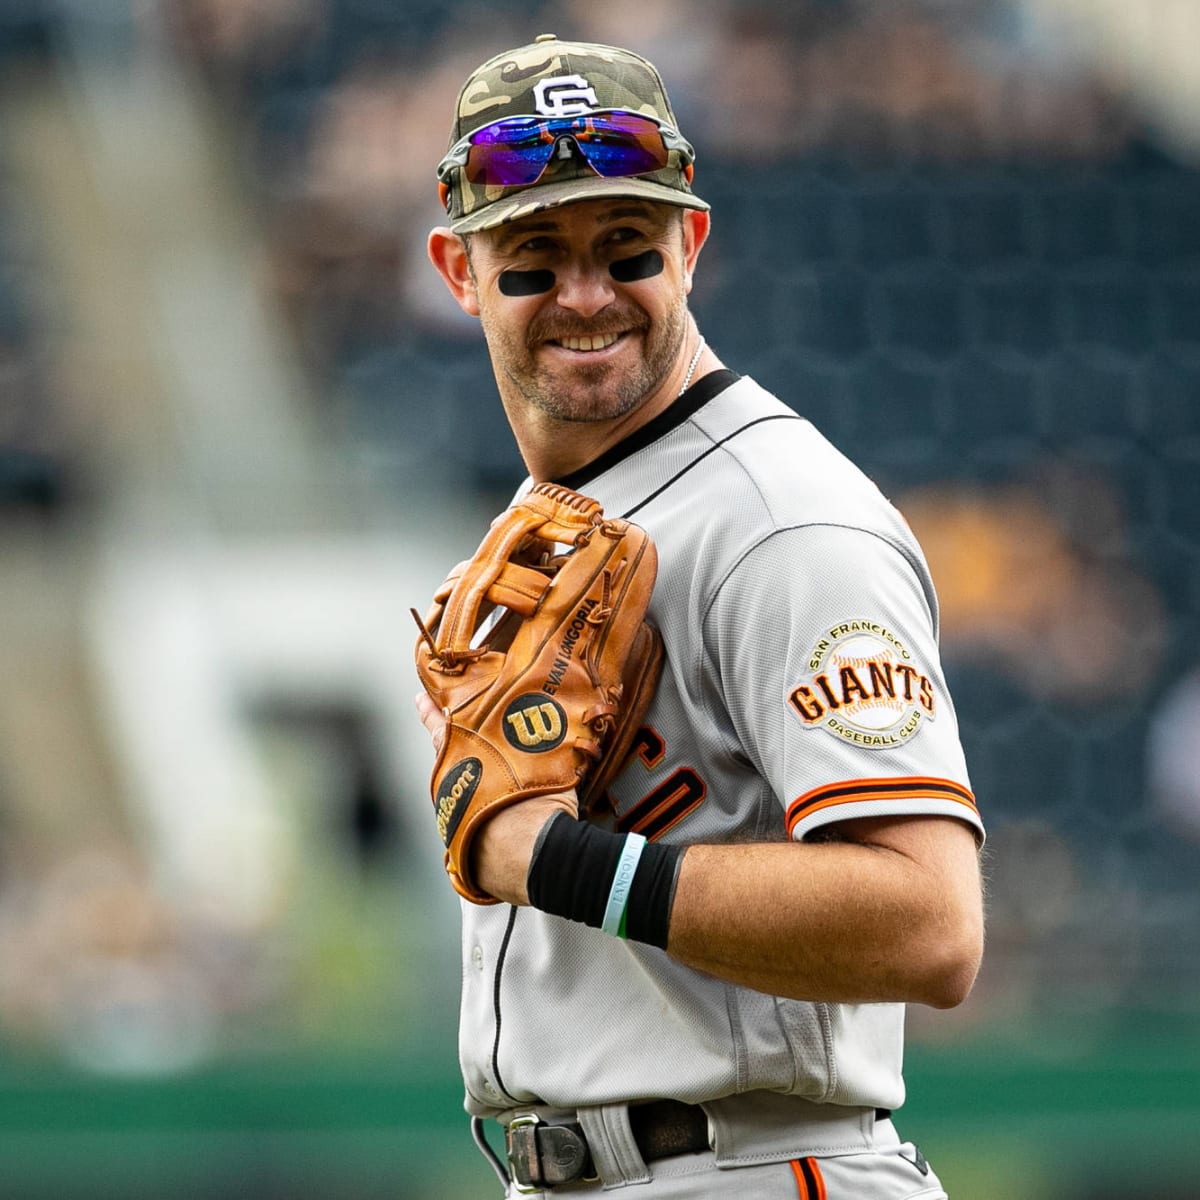 The Giants are interested in trading for Evan Longoria - McCovey